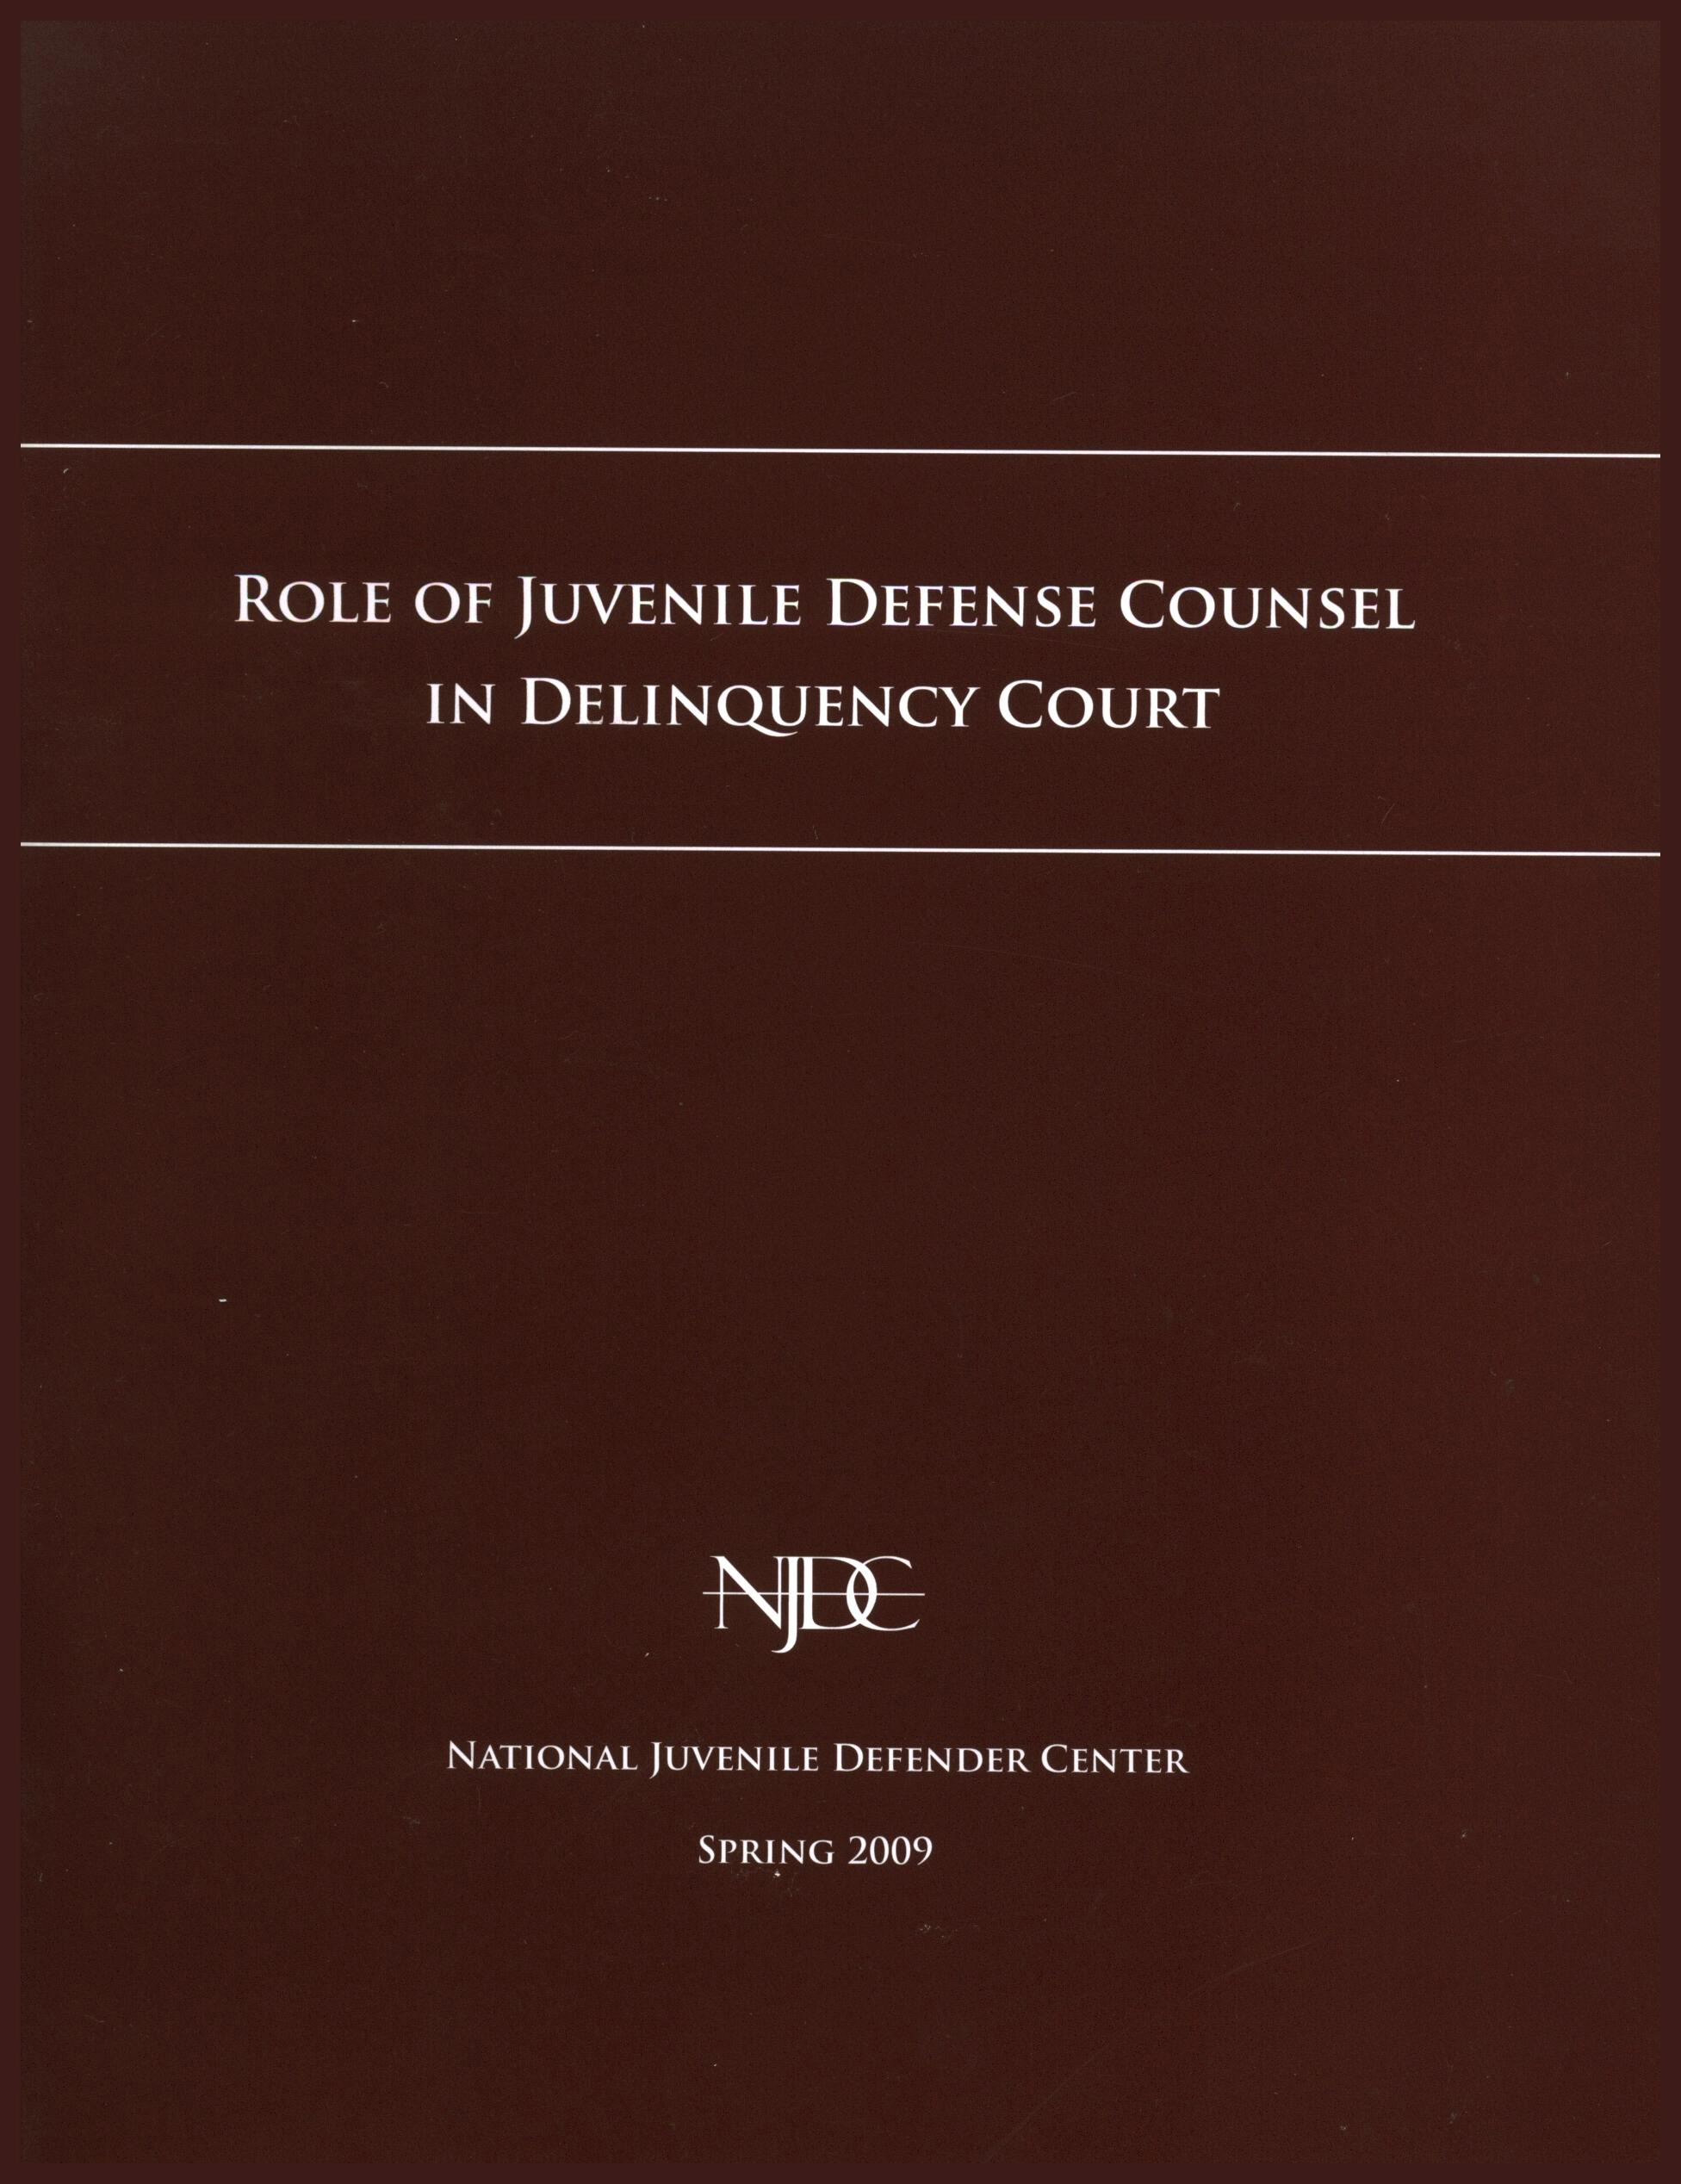 Role of juvenile defense counsel in delinquency court